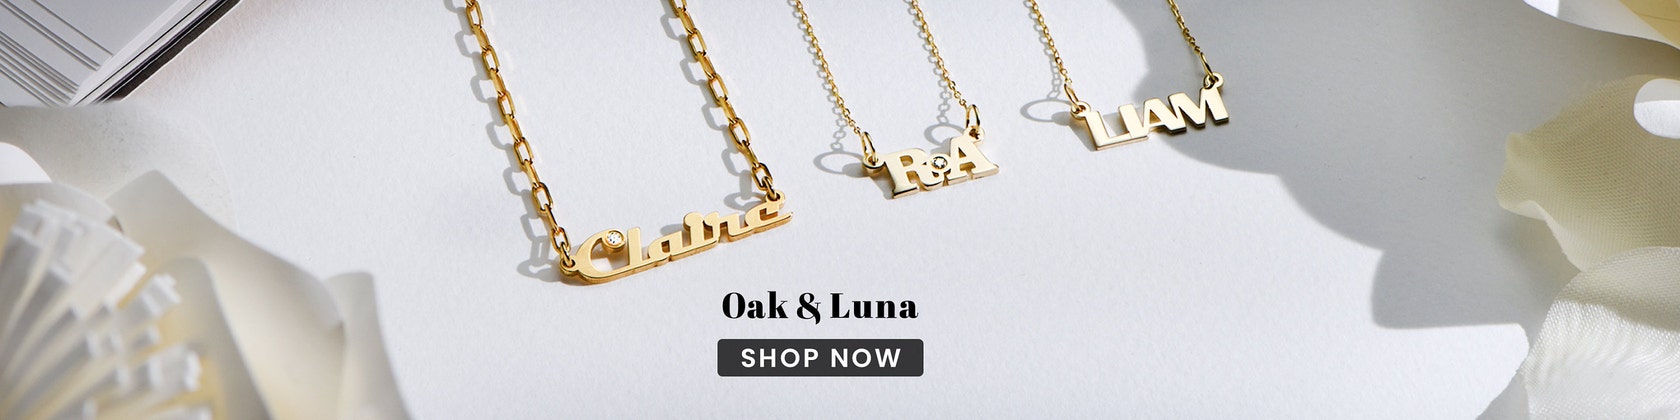 Engraved Axis T Lock Necklace with Diamonds- Silver - Oak & Luna